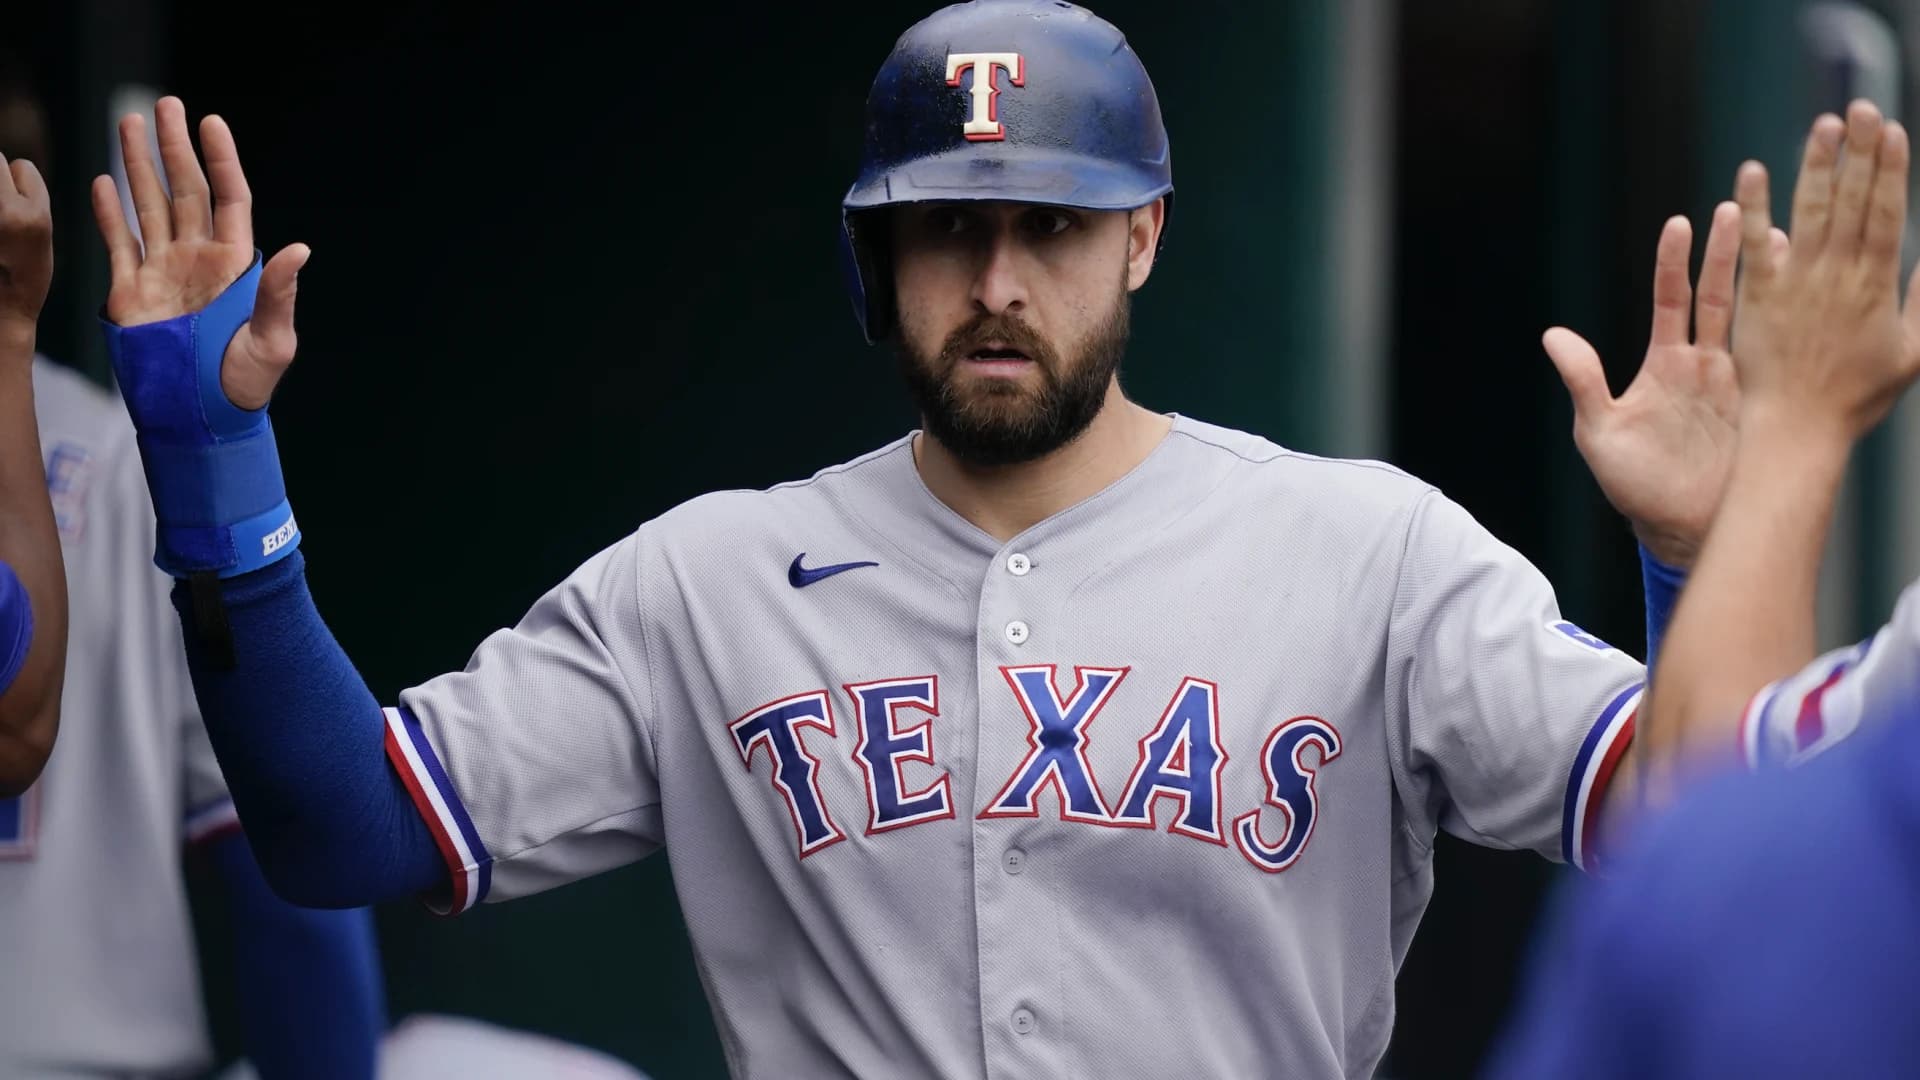 Left turn: Boone says Yankees 'a lot better' with Joey Gallo